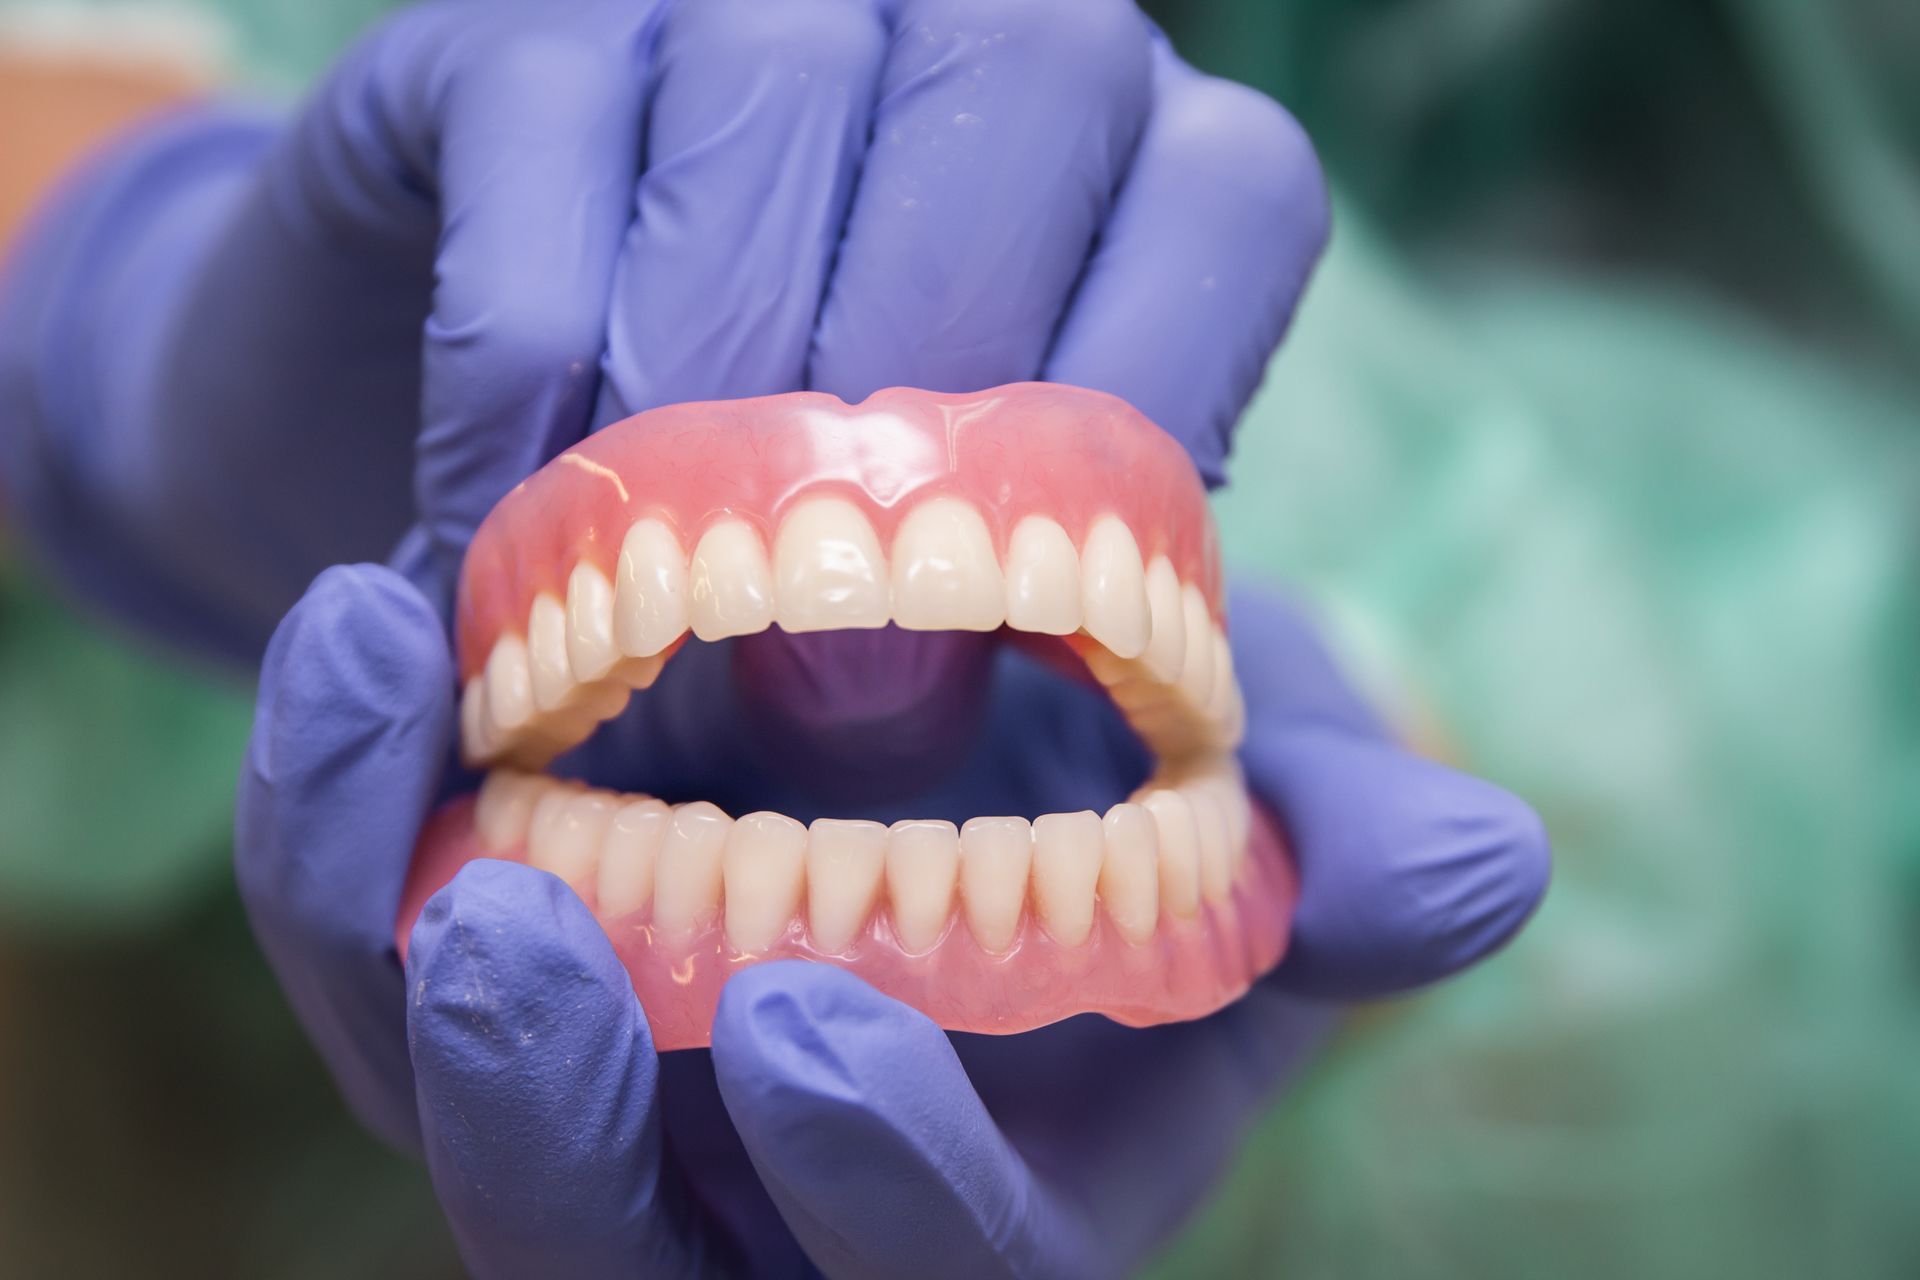 a person wearing purple gloves is holding a denture in their hands .